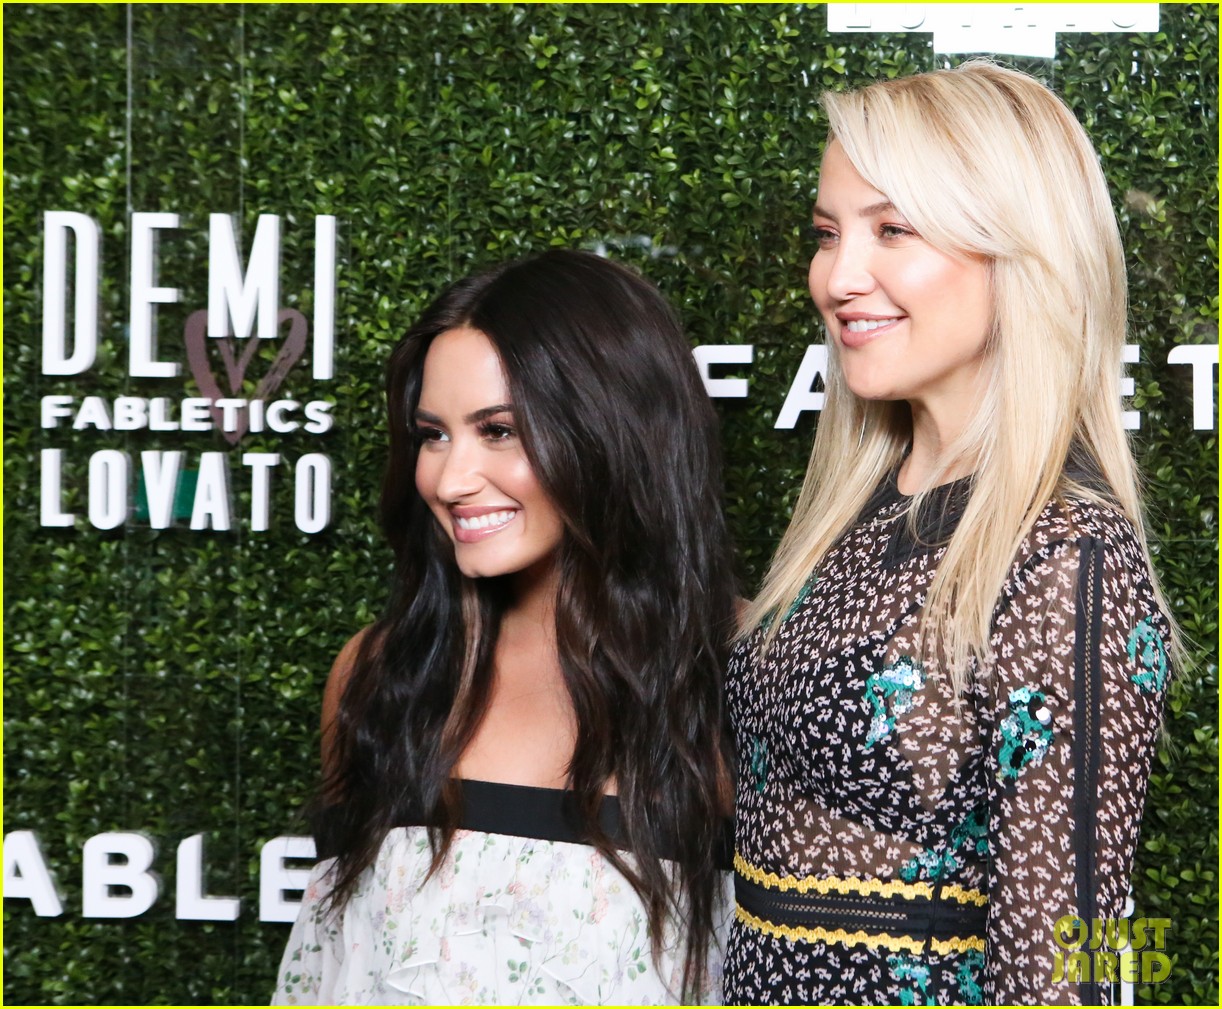 demi lovato celebrates the launch of her fabletics collection10